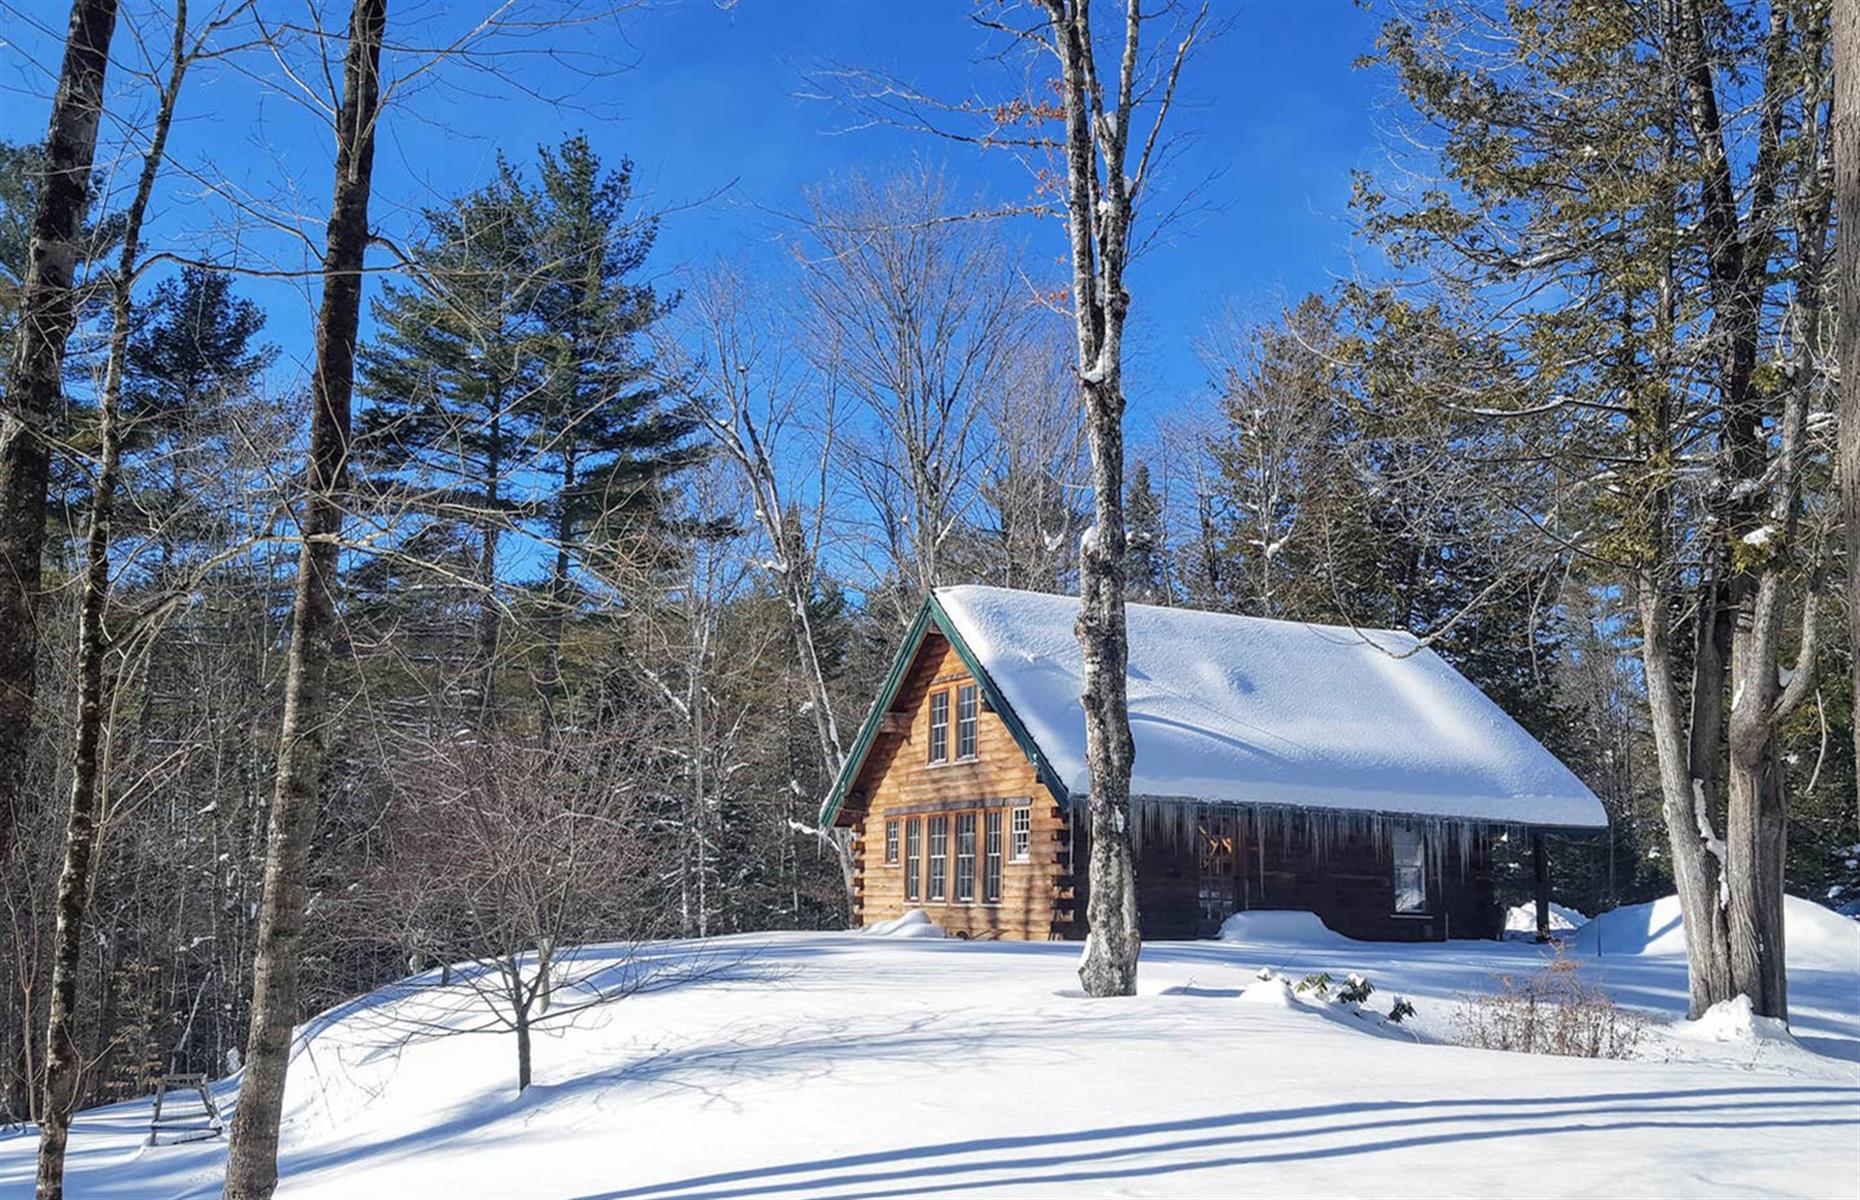 <p>Set in the beautiful countryside of rural northeastern Vermont, <a href="https://www.airbnb.co.uk/rooms/16231237">this log cabin</a> allows visitors to escape the daily grind and relax within a peaceful forest setting. Available to book from $91 a night, this charming cabin offers the chance to stargaze at night, snow-shoe in winter or simply sit by the firepit roasting marshmallows.</p>